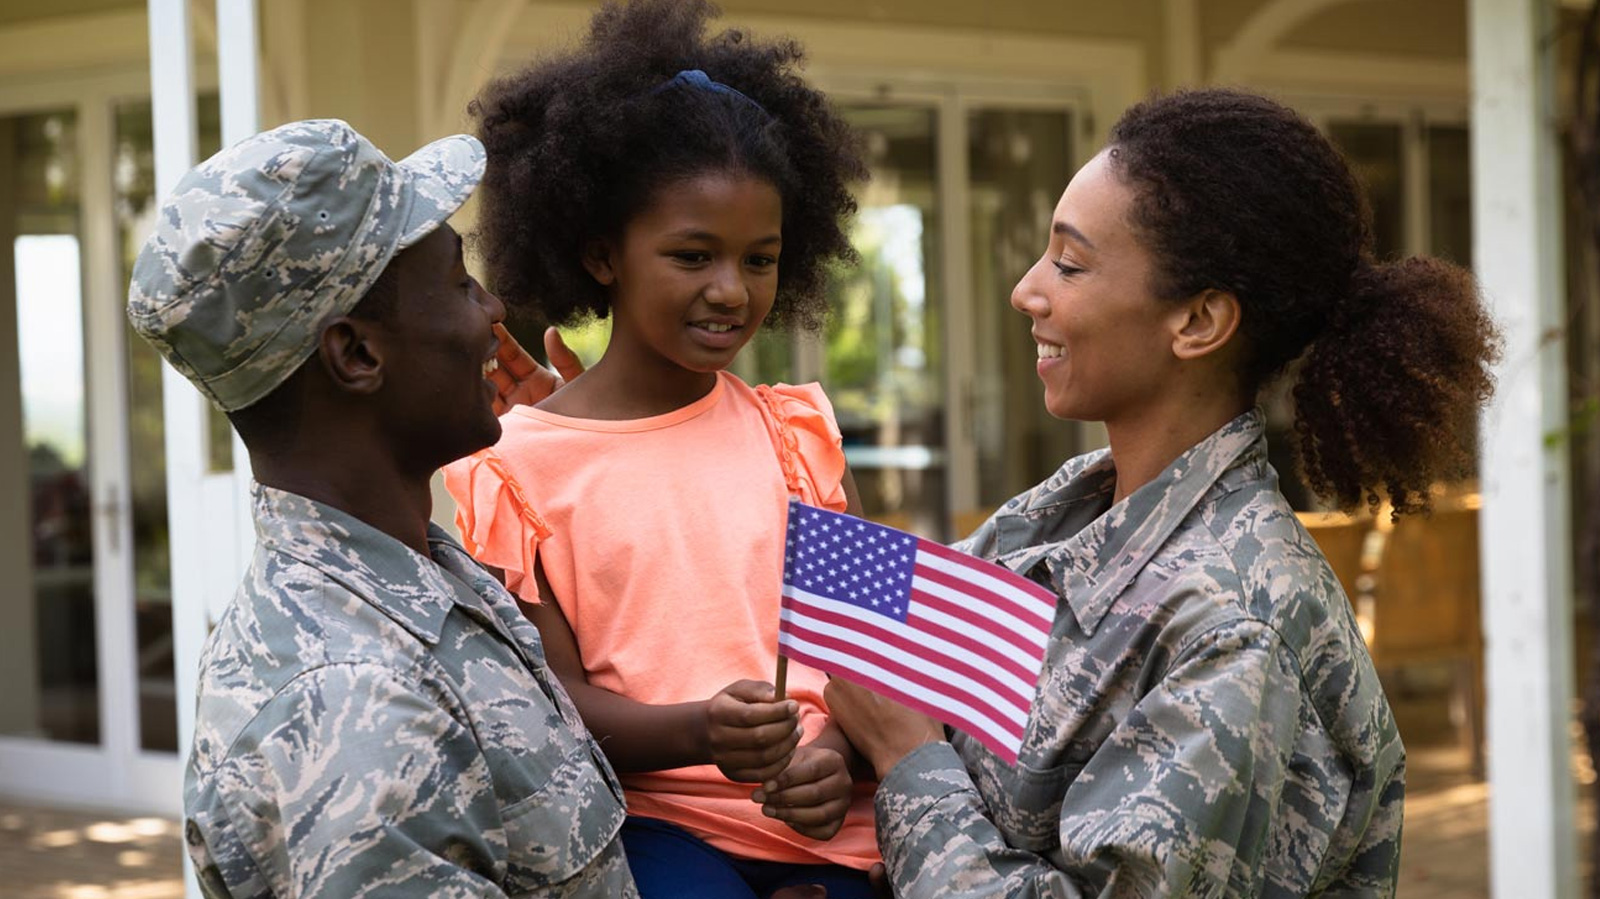 MILITARY FAMILIES